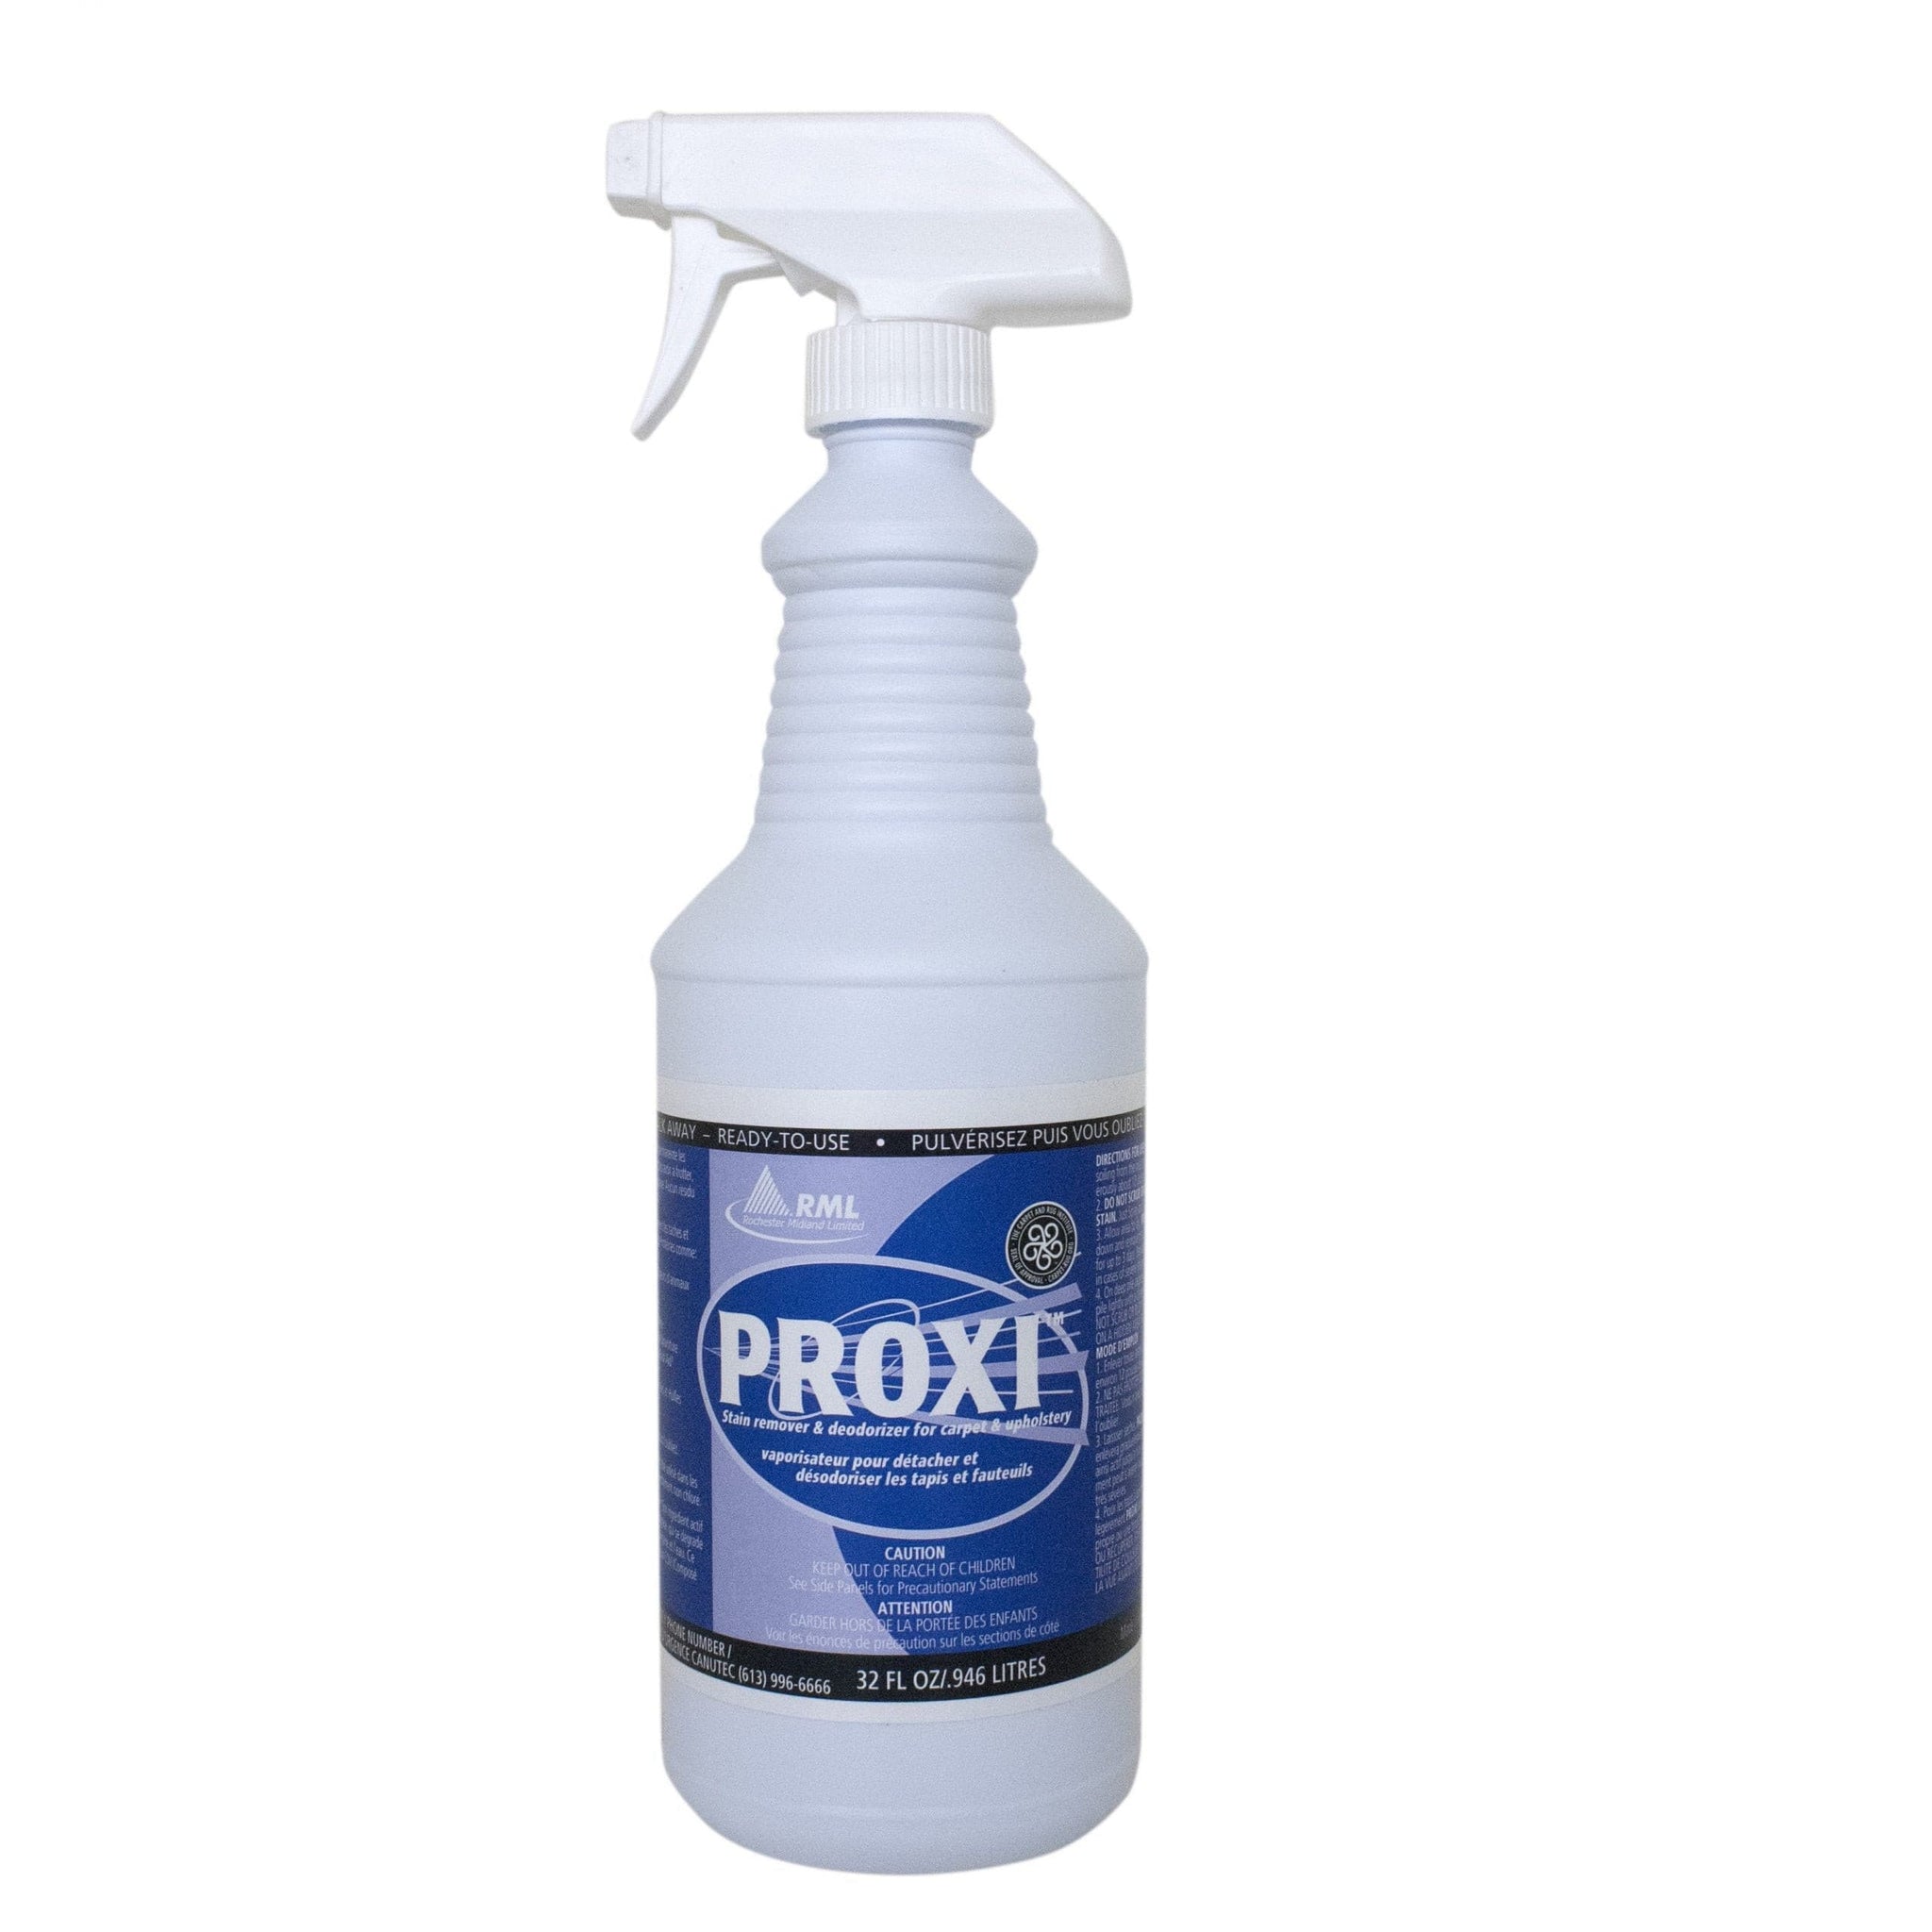 PROXI SPRAY STAIN REMOVER The Custodian Commercial Sanitation & Industrial Maintenance Products